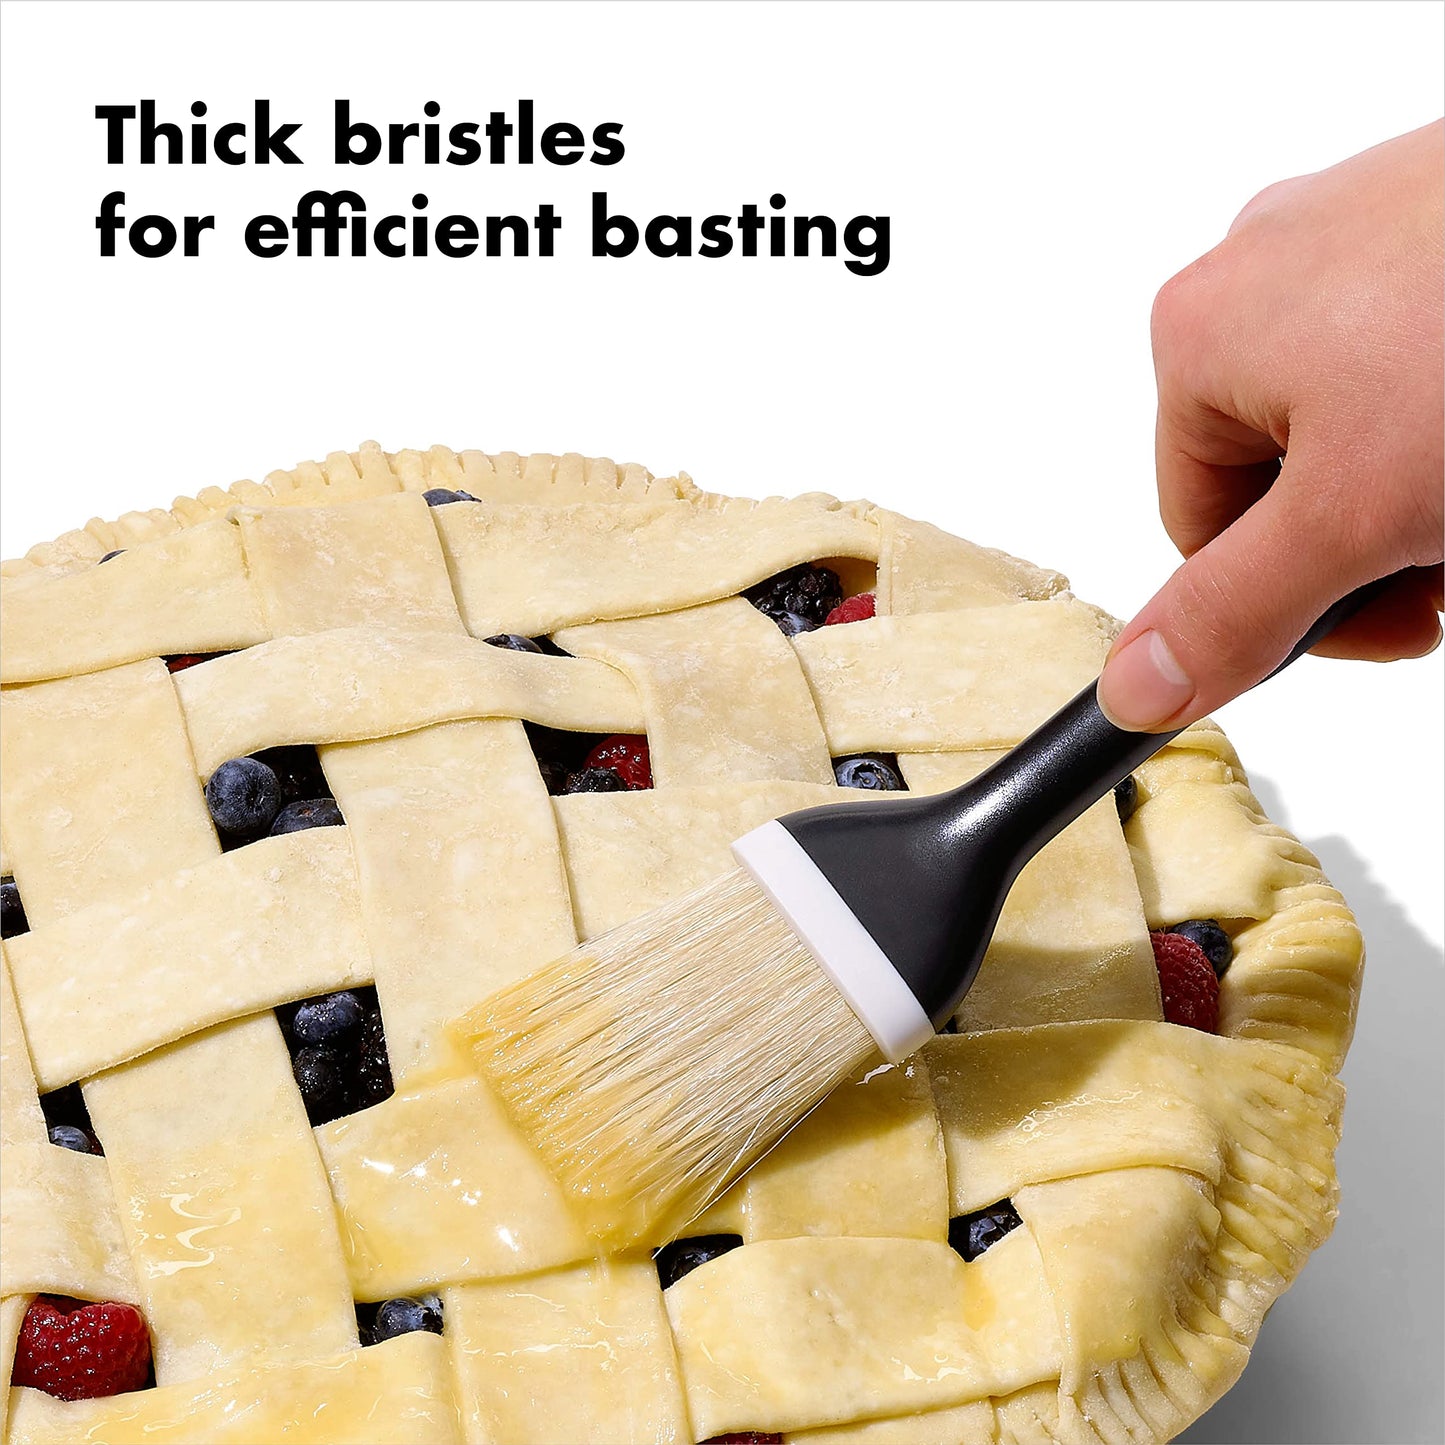 OXO Good Grips 1 1/2" Natural Pastry Brush | Natural Boar Bristles | Non-slip Grip | Dishwasher Safe | Ideal for Butter, Oil, and Baking